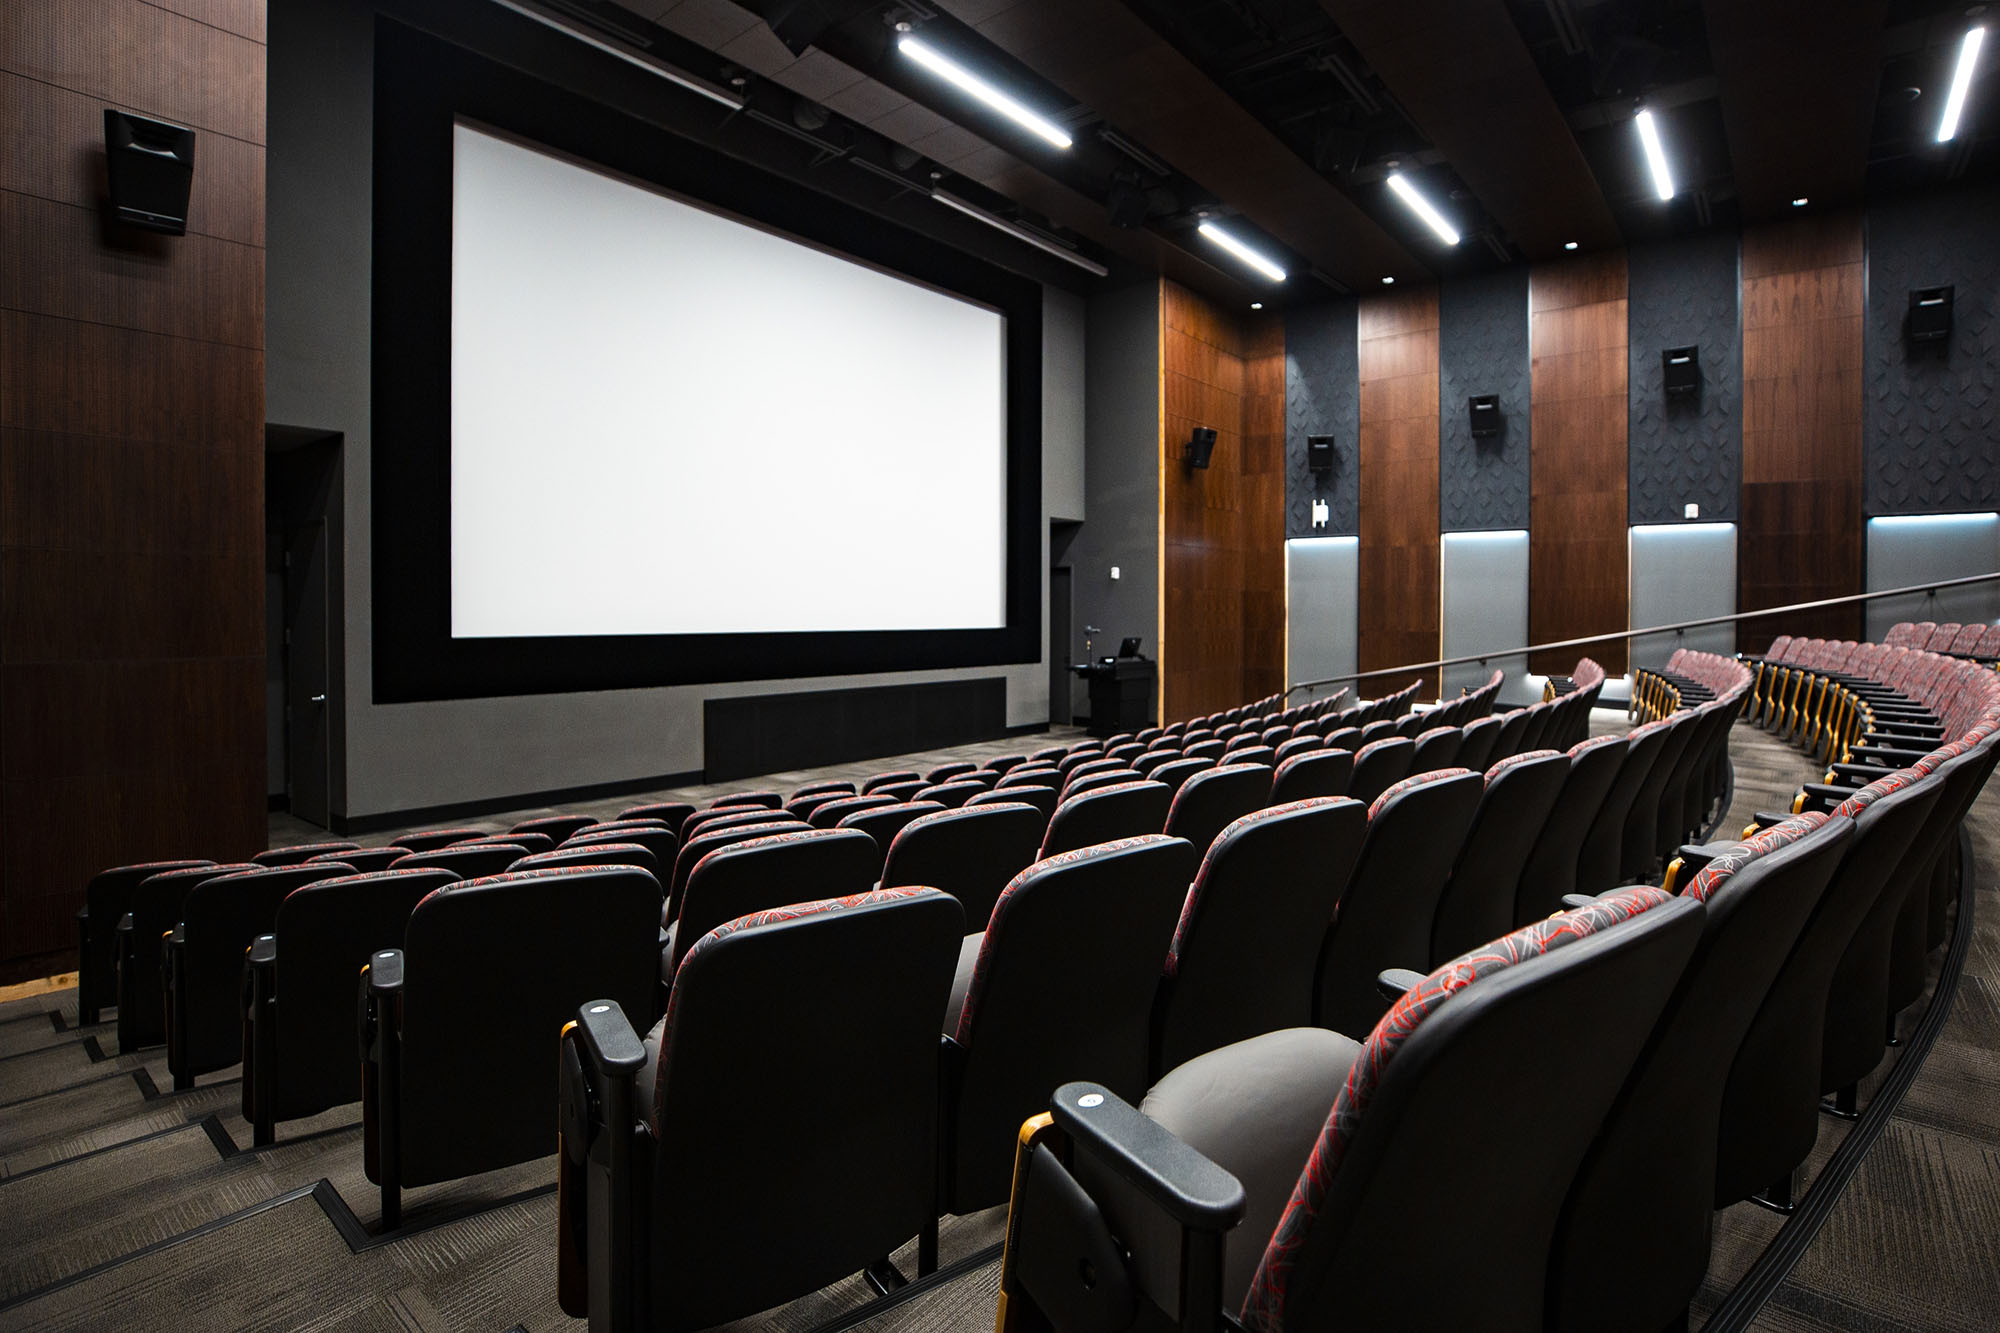 A giant white screen in front of rows of empty seats in an amphitheater-style classroom. 